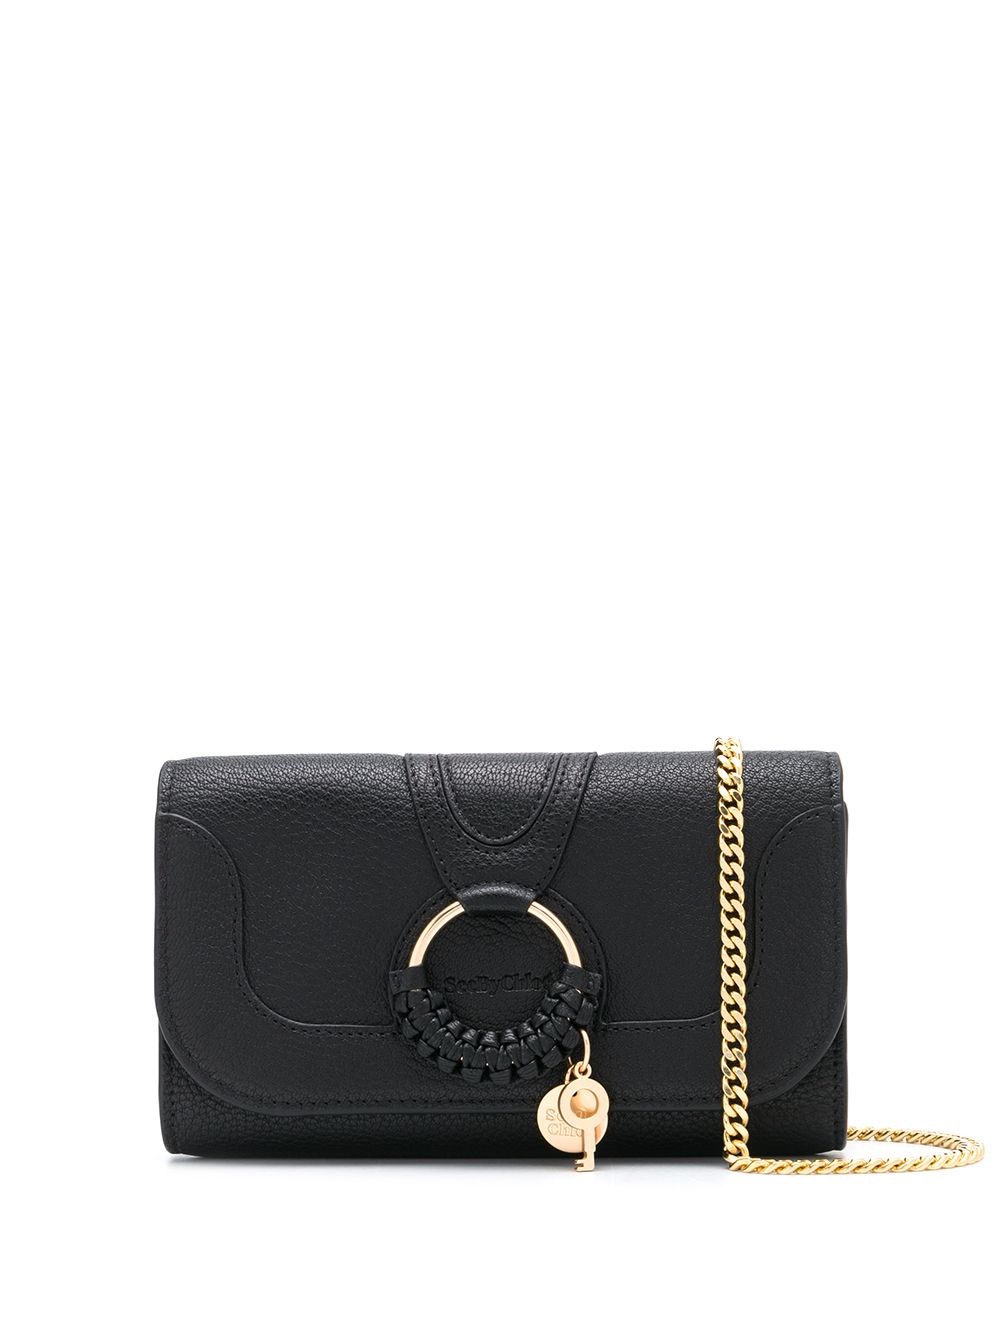 See By Chloé Hana Leather Clutch In Black  